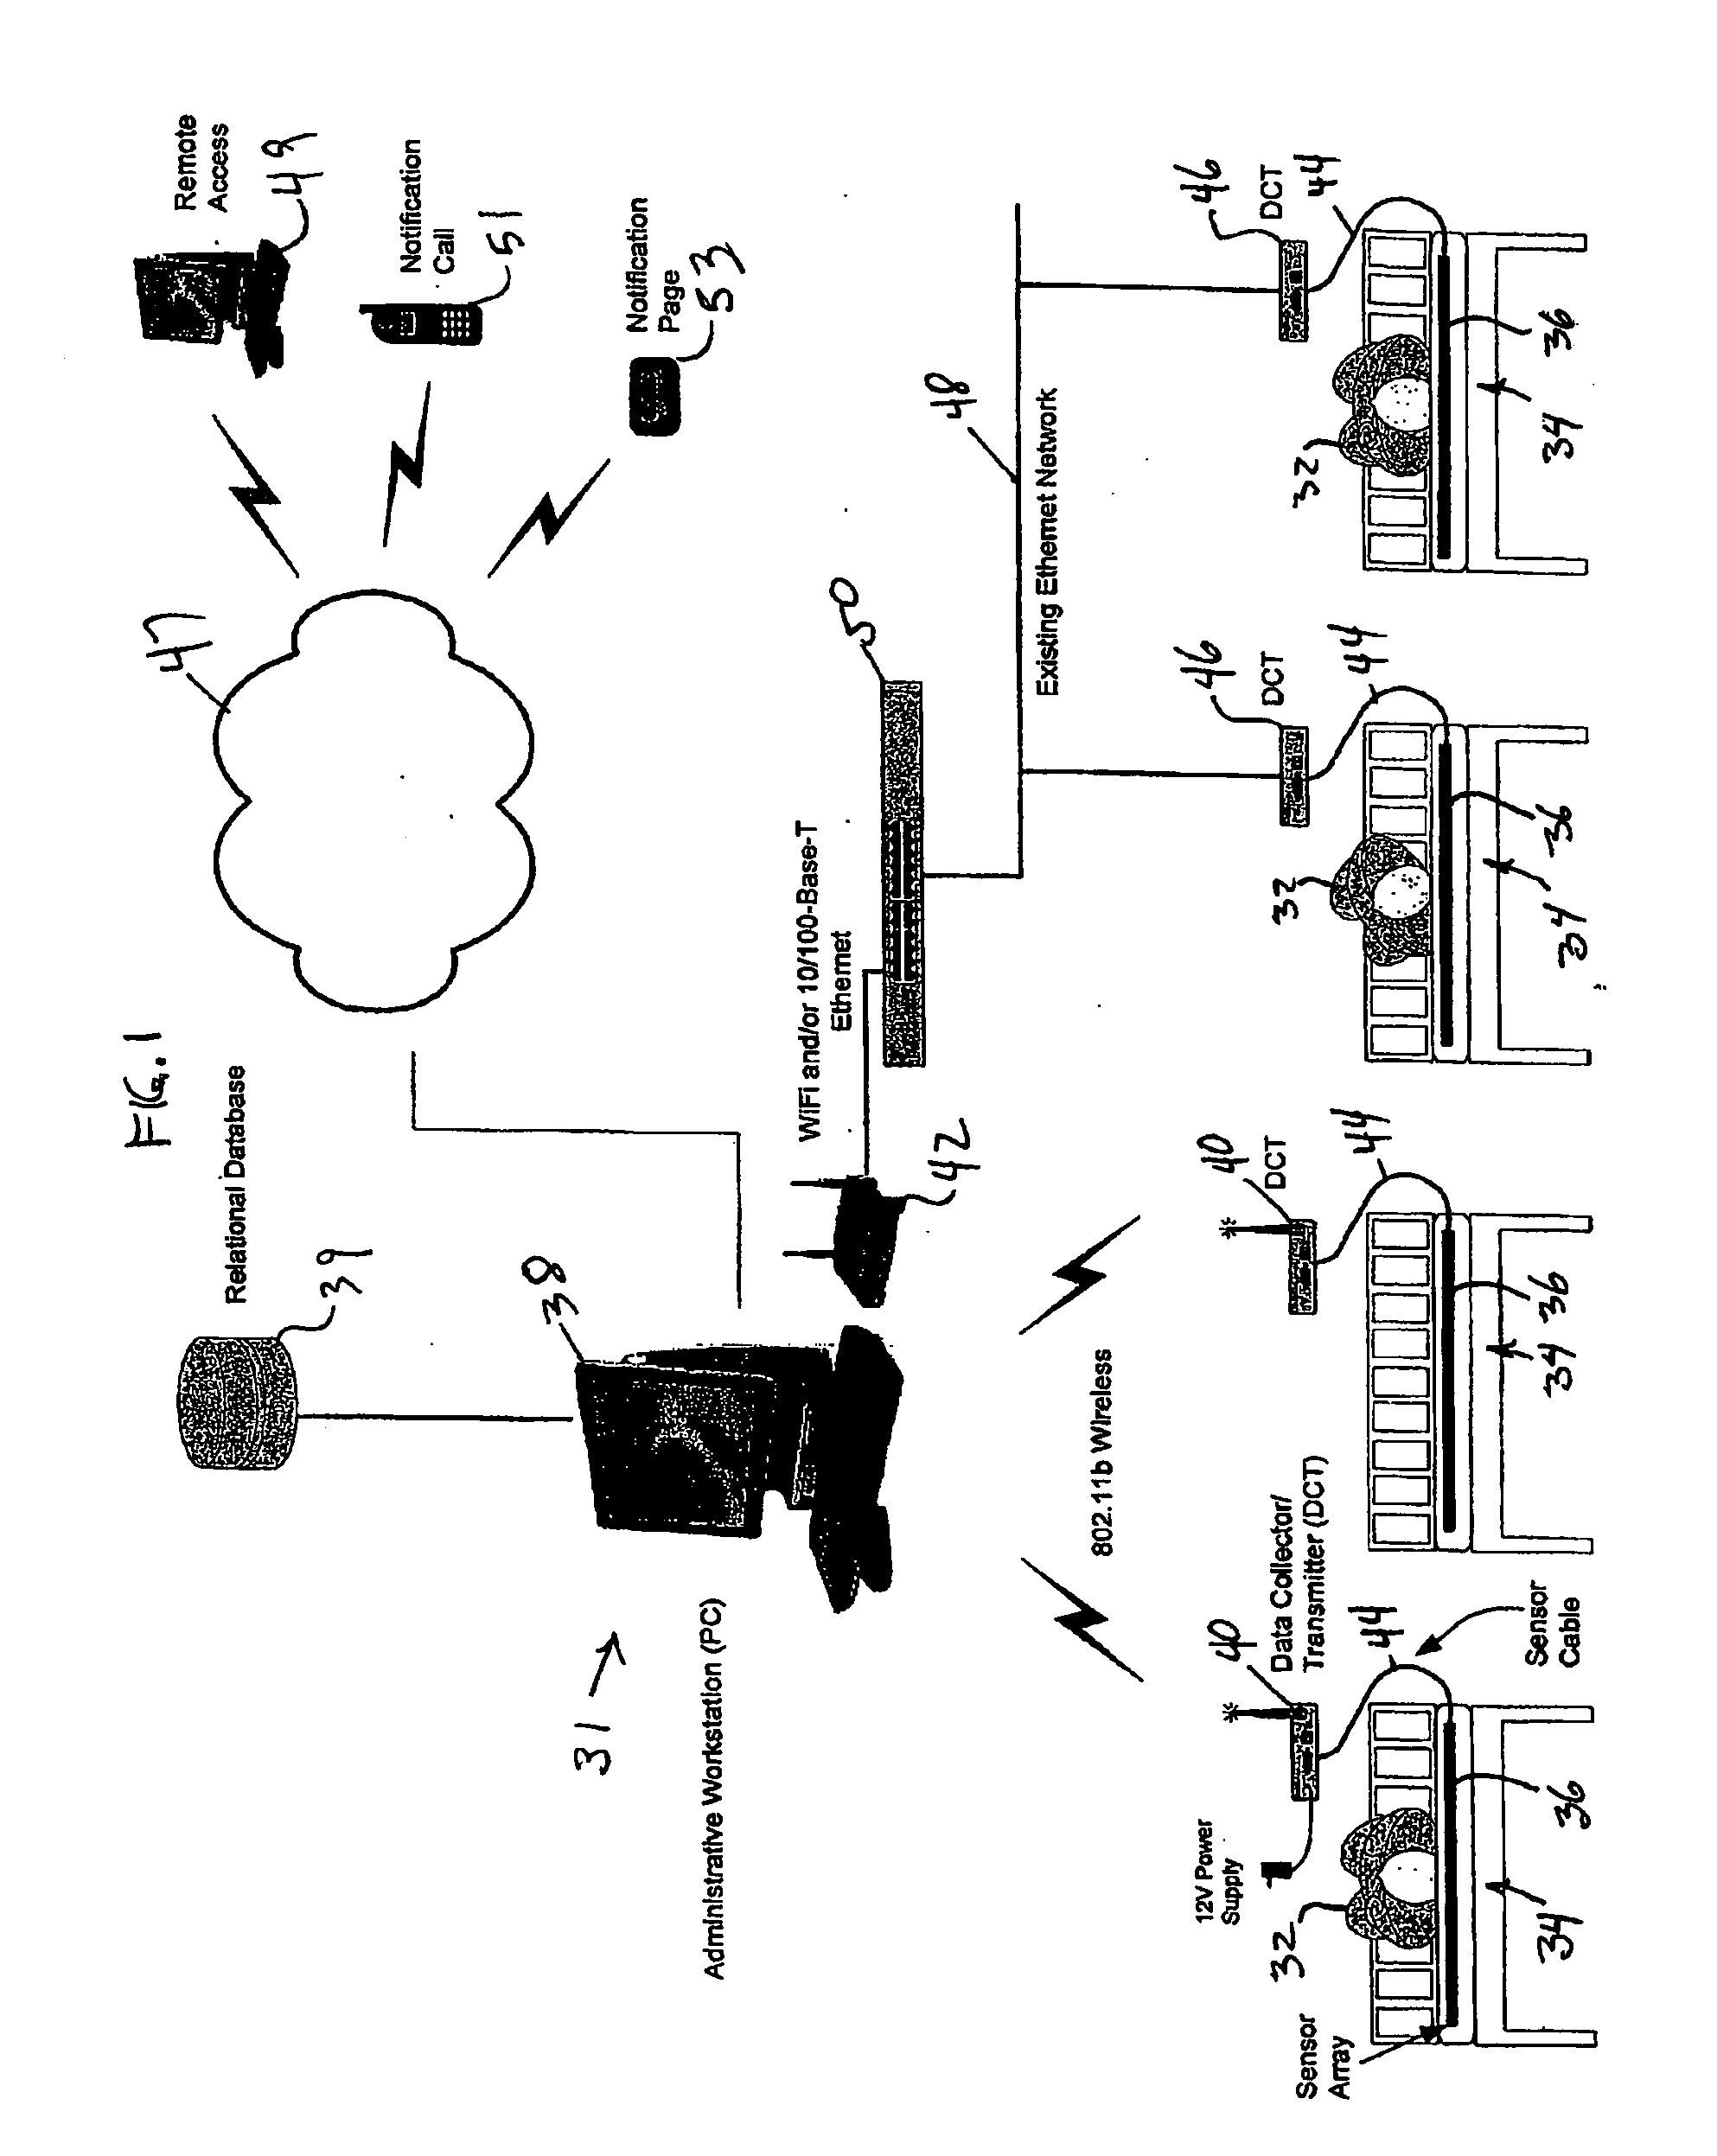 Monitoring systems and methods